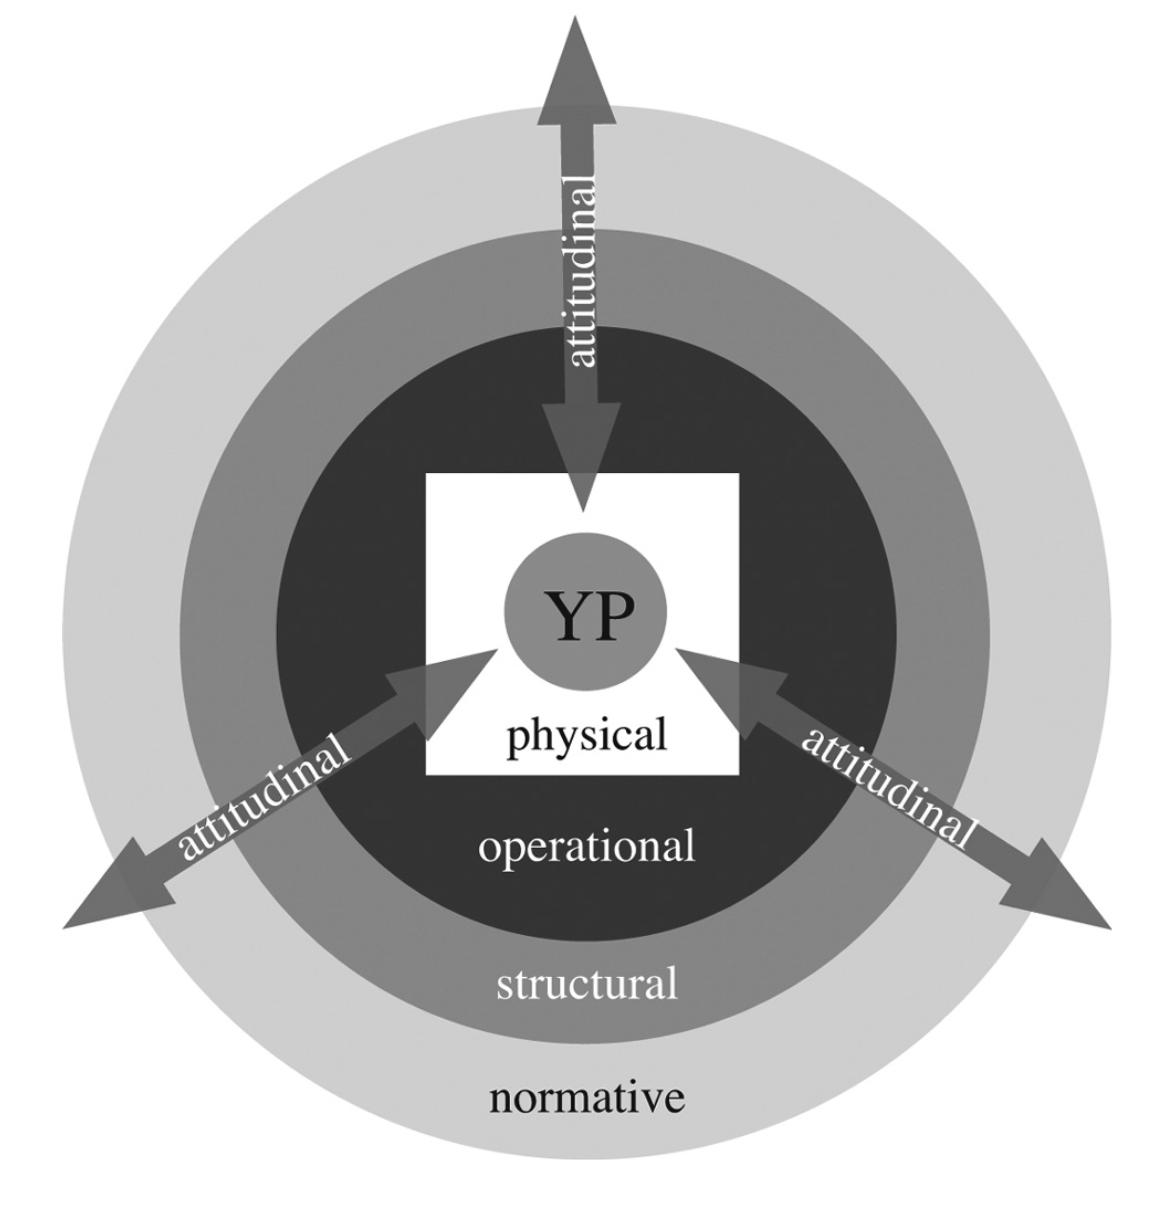 This illustration of Neema Kudva and David Driskell’s Five Key Dimensions of Participation as Spatial Practice shows a nested presentation of the model in which the attitudinal dimension transects the other dimensions because it is expressed through the culture, interactions, and relationships within an organization.